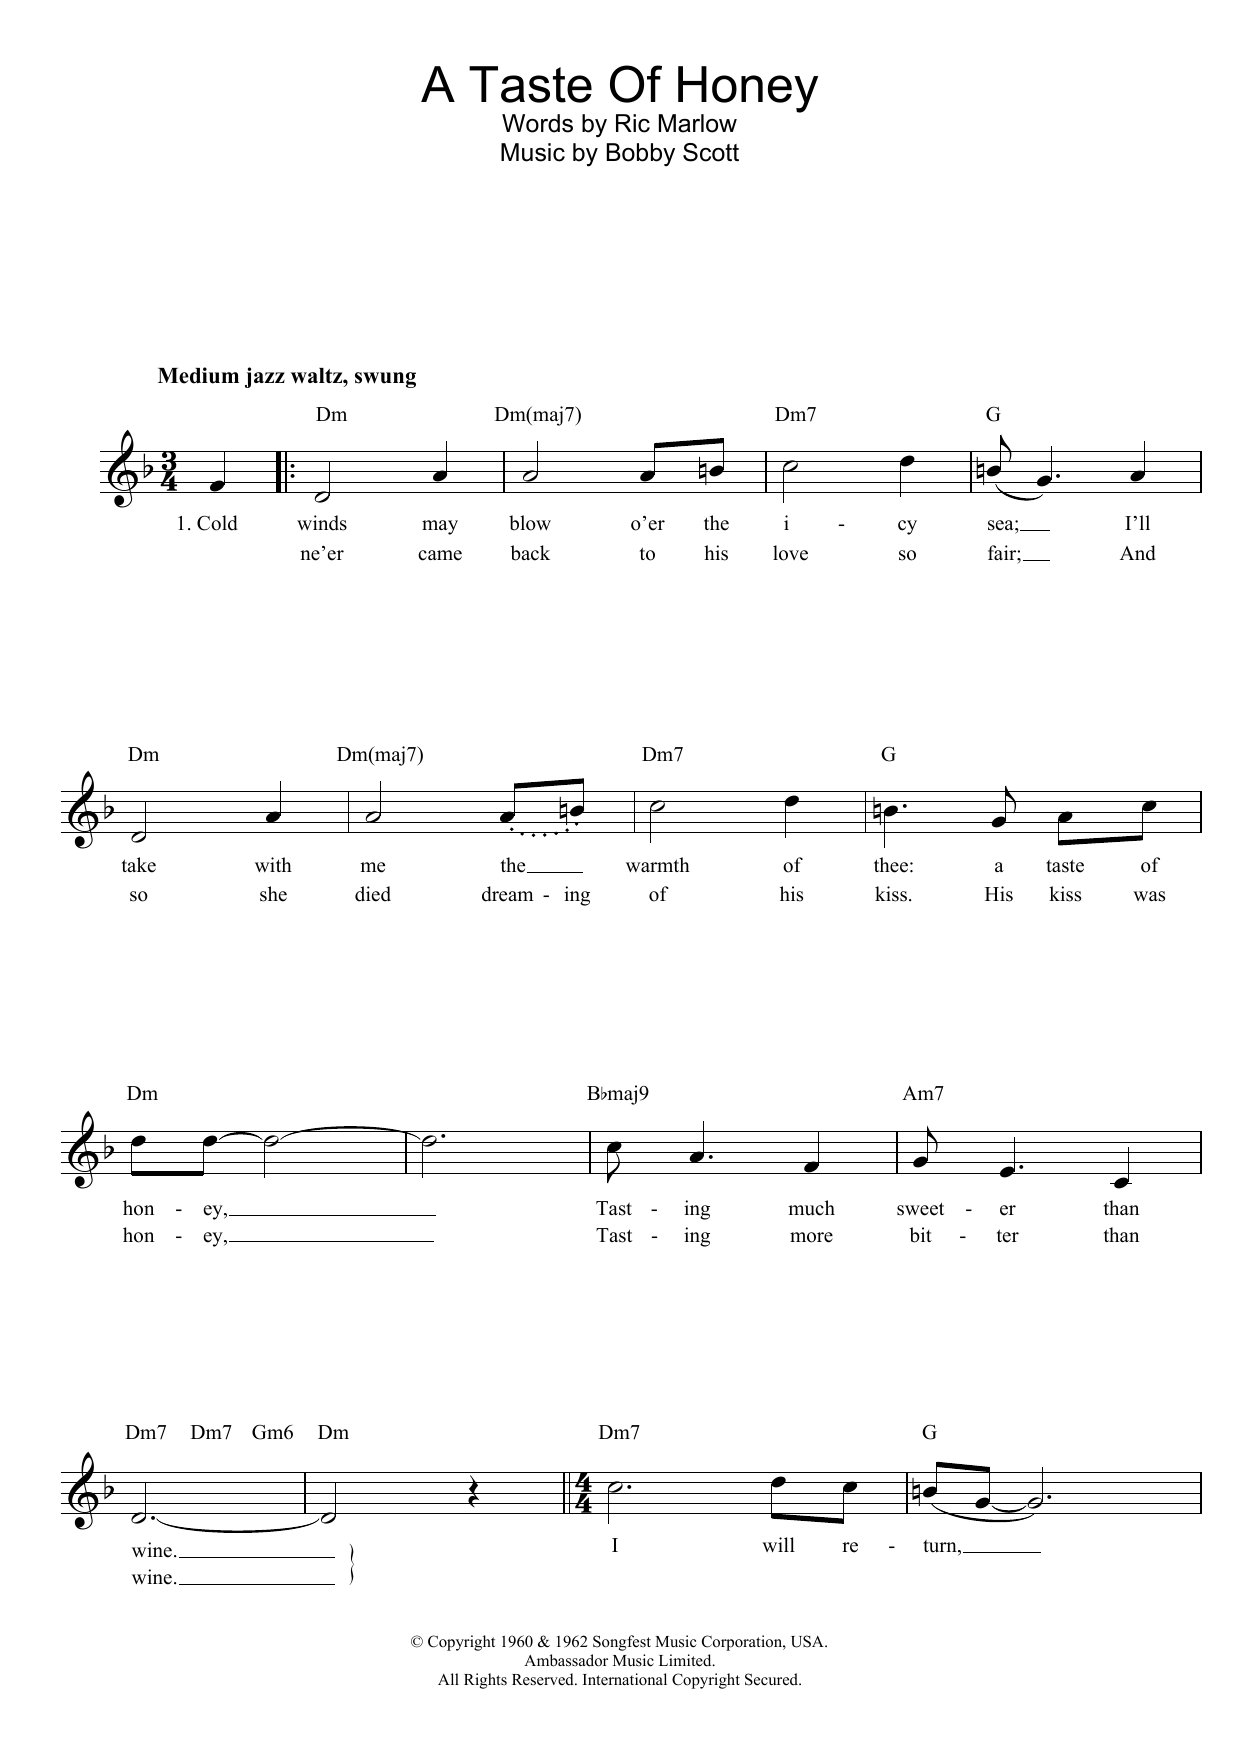 Download Marlow And Scott A Taste Of Honey Sheet Music